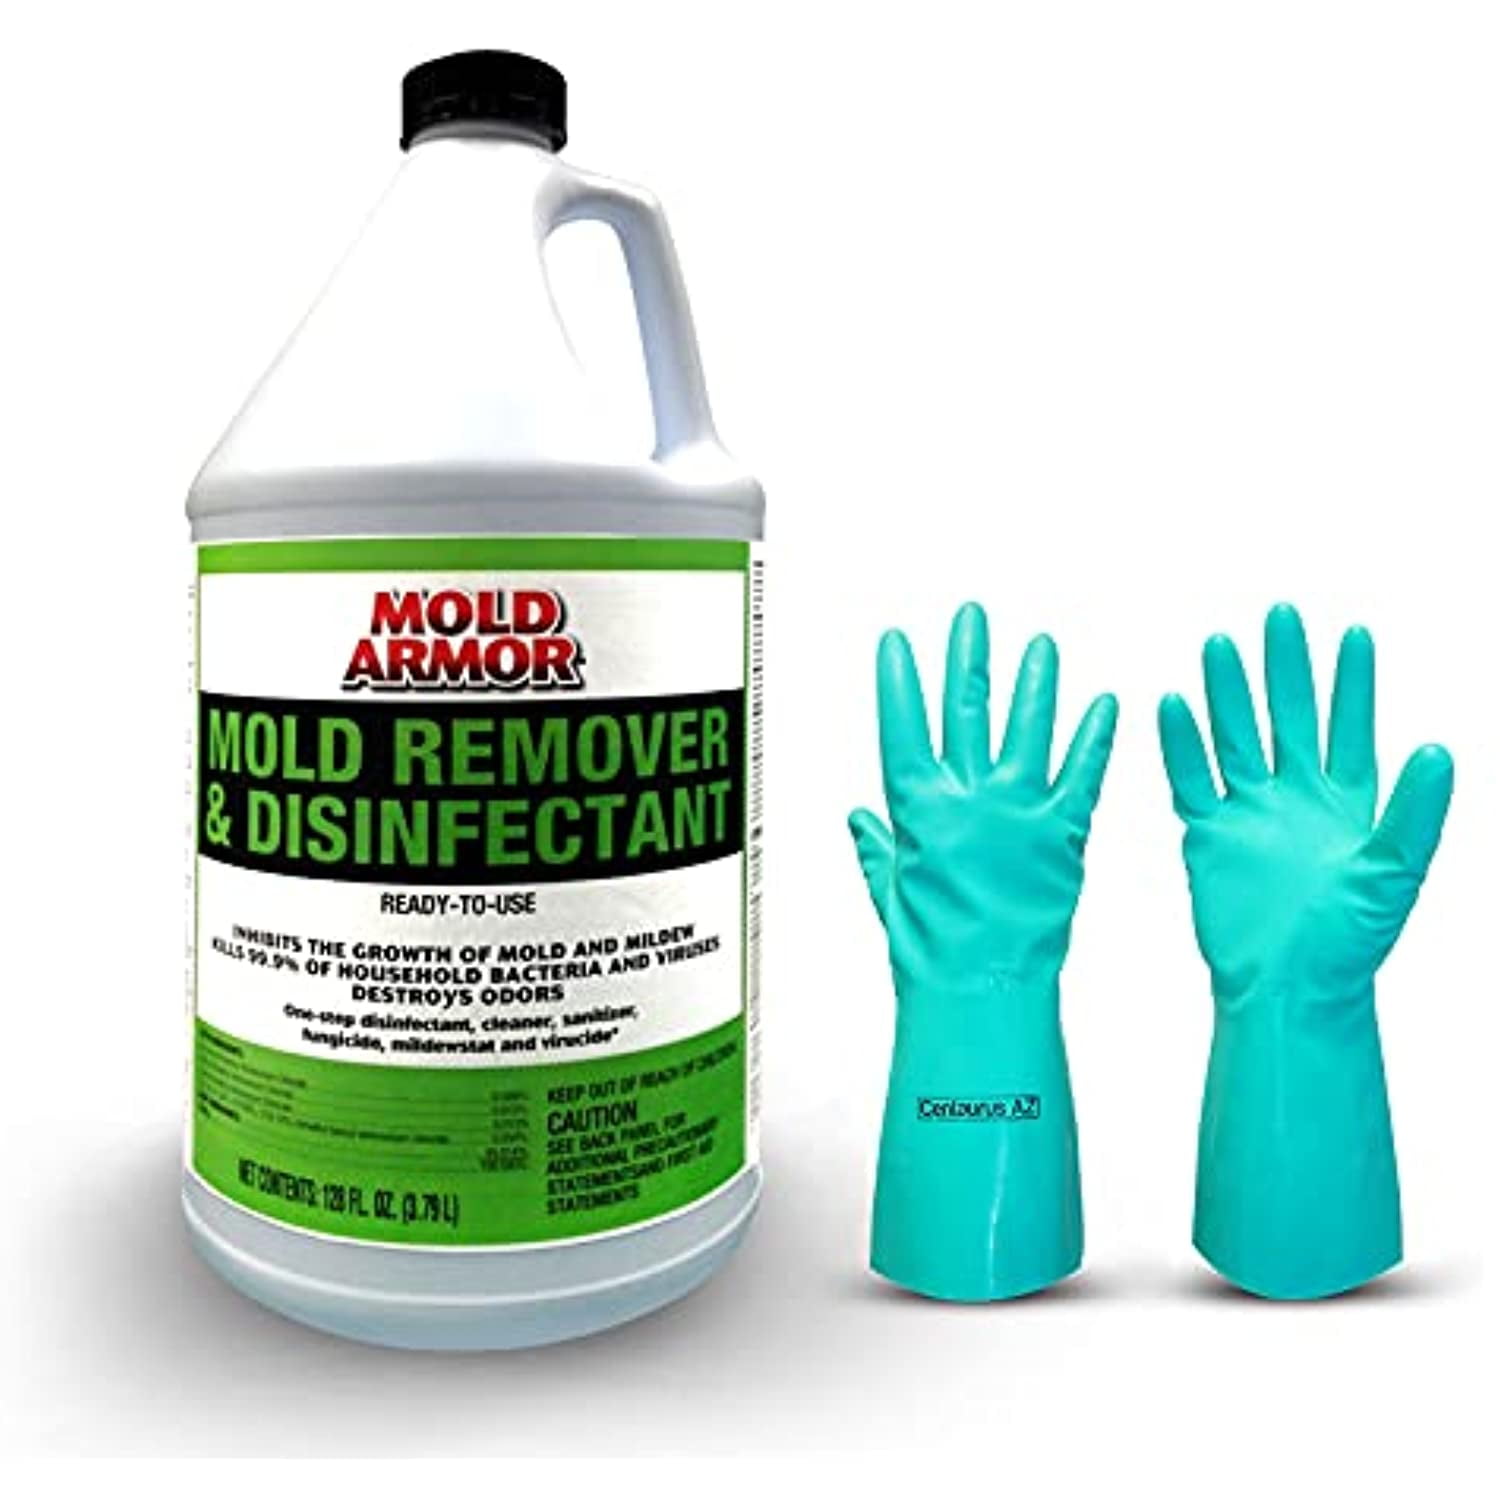 Mold Bomb Fogger: The Most Effective Weapon to Eliminate Mold from Your Home